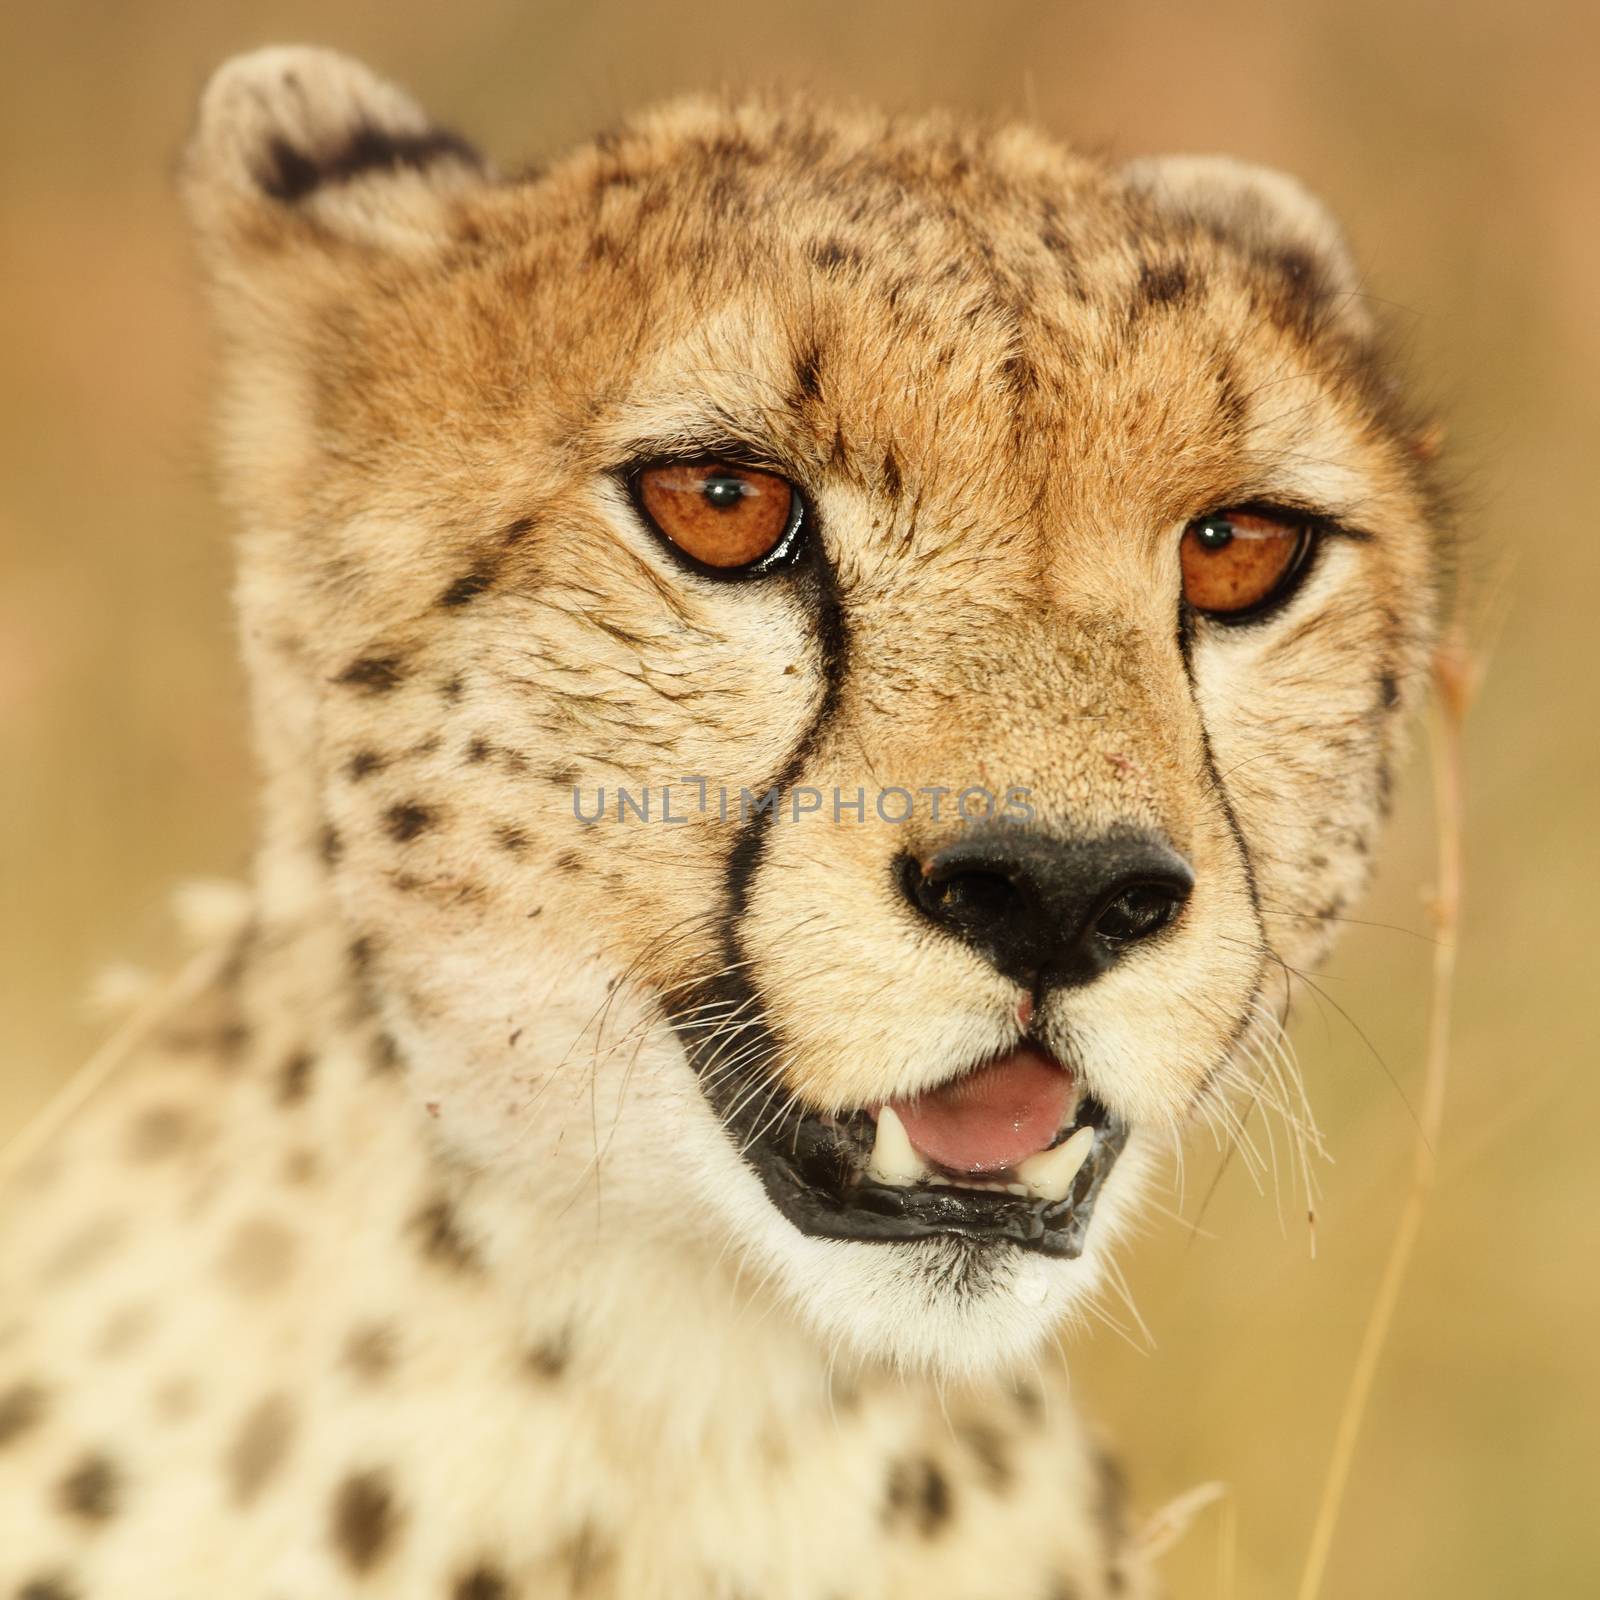 Cheetah in the wilderness of Africa